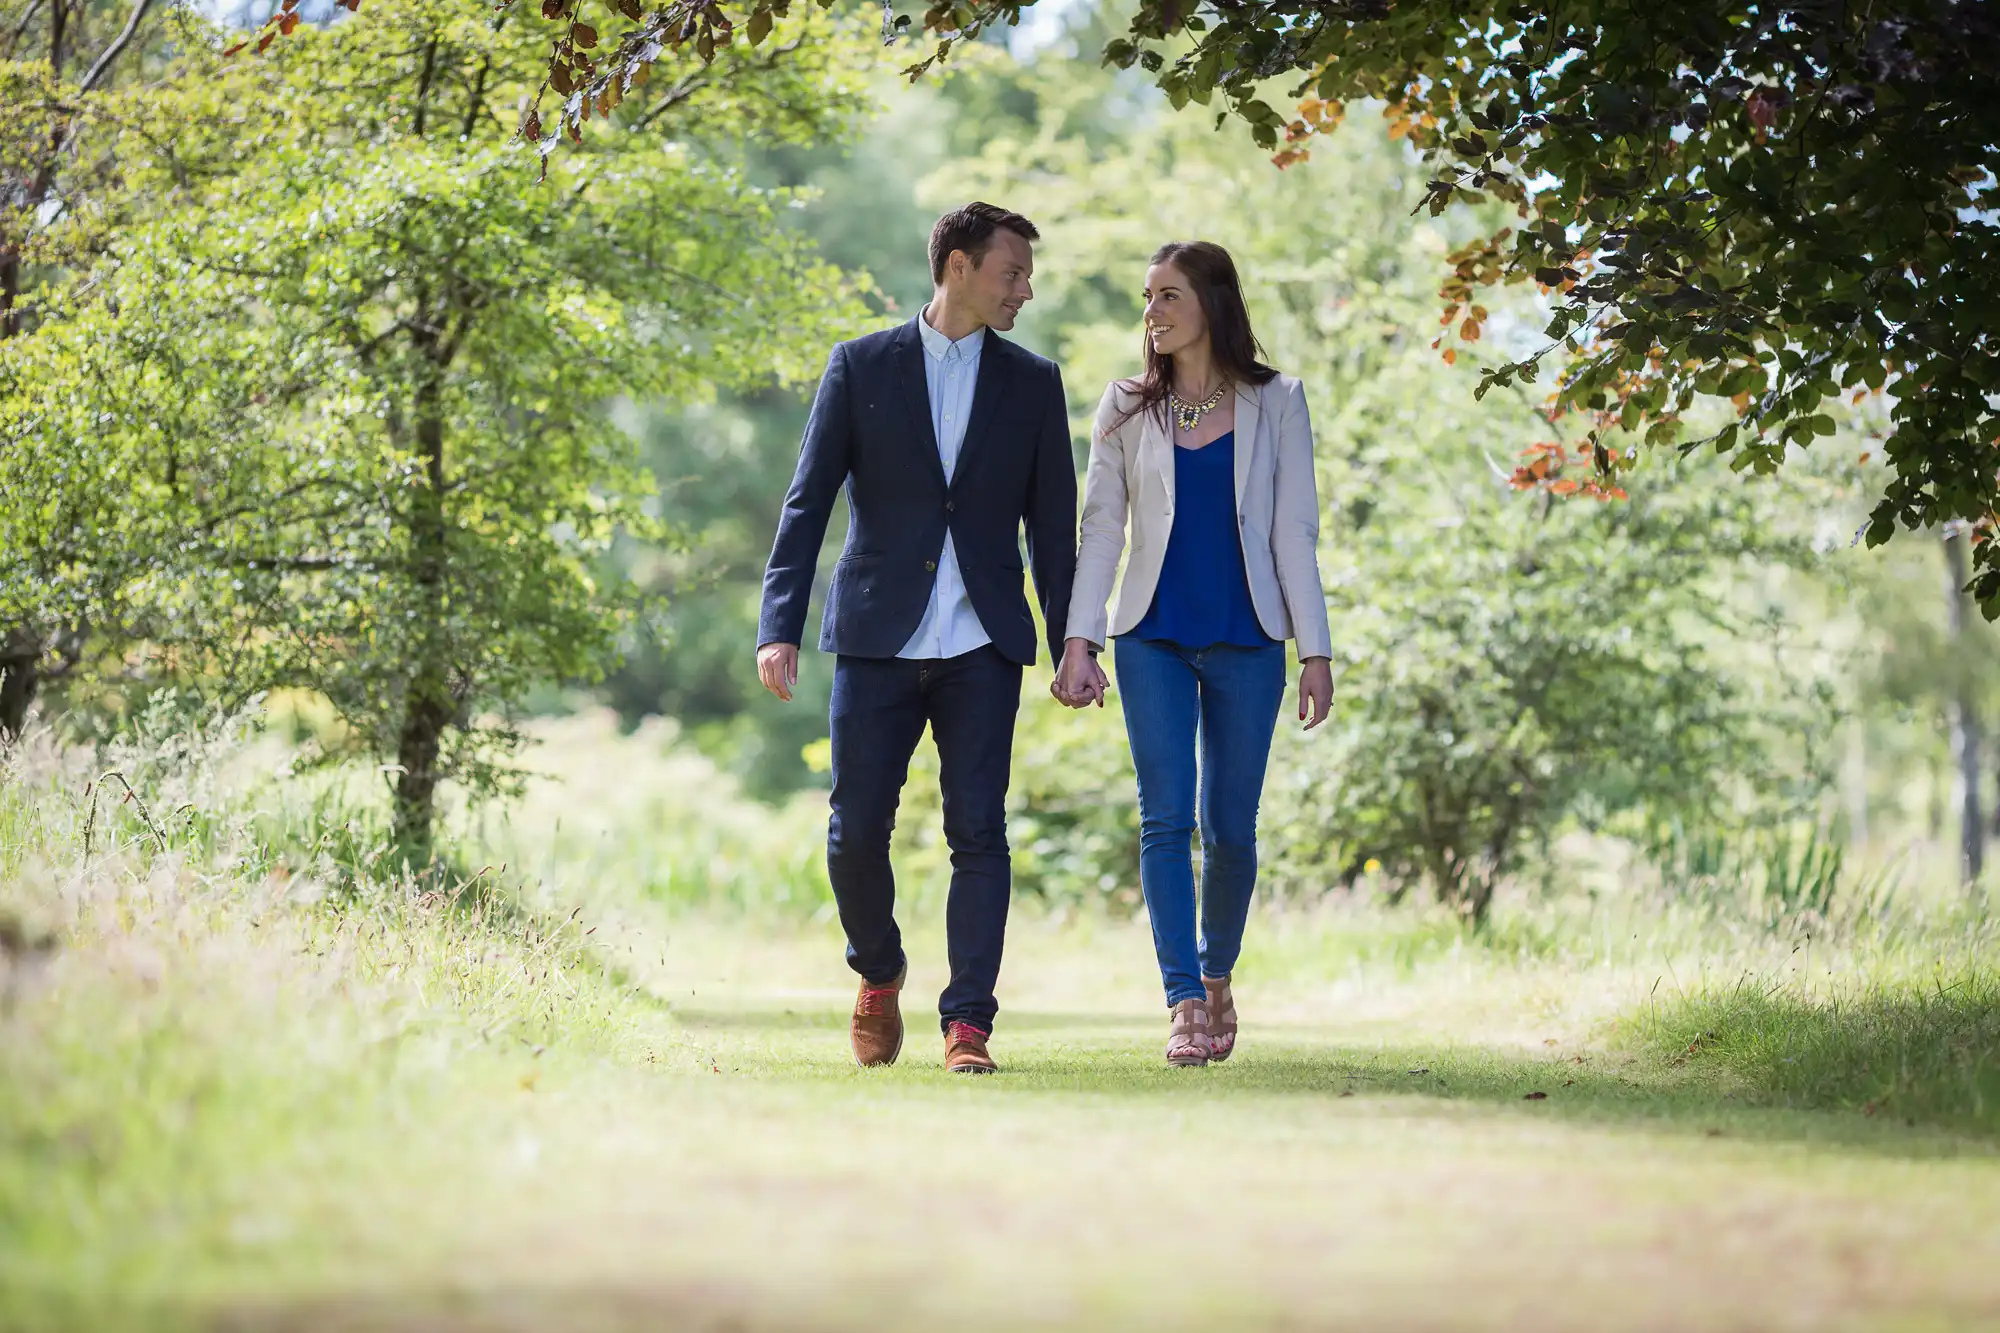 A couple walks hand in hand along a tree-lined path in a sunny park, both dressed in smart-casual attire.